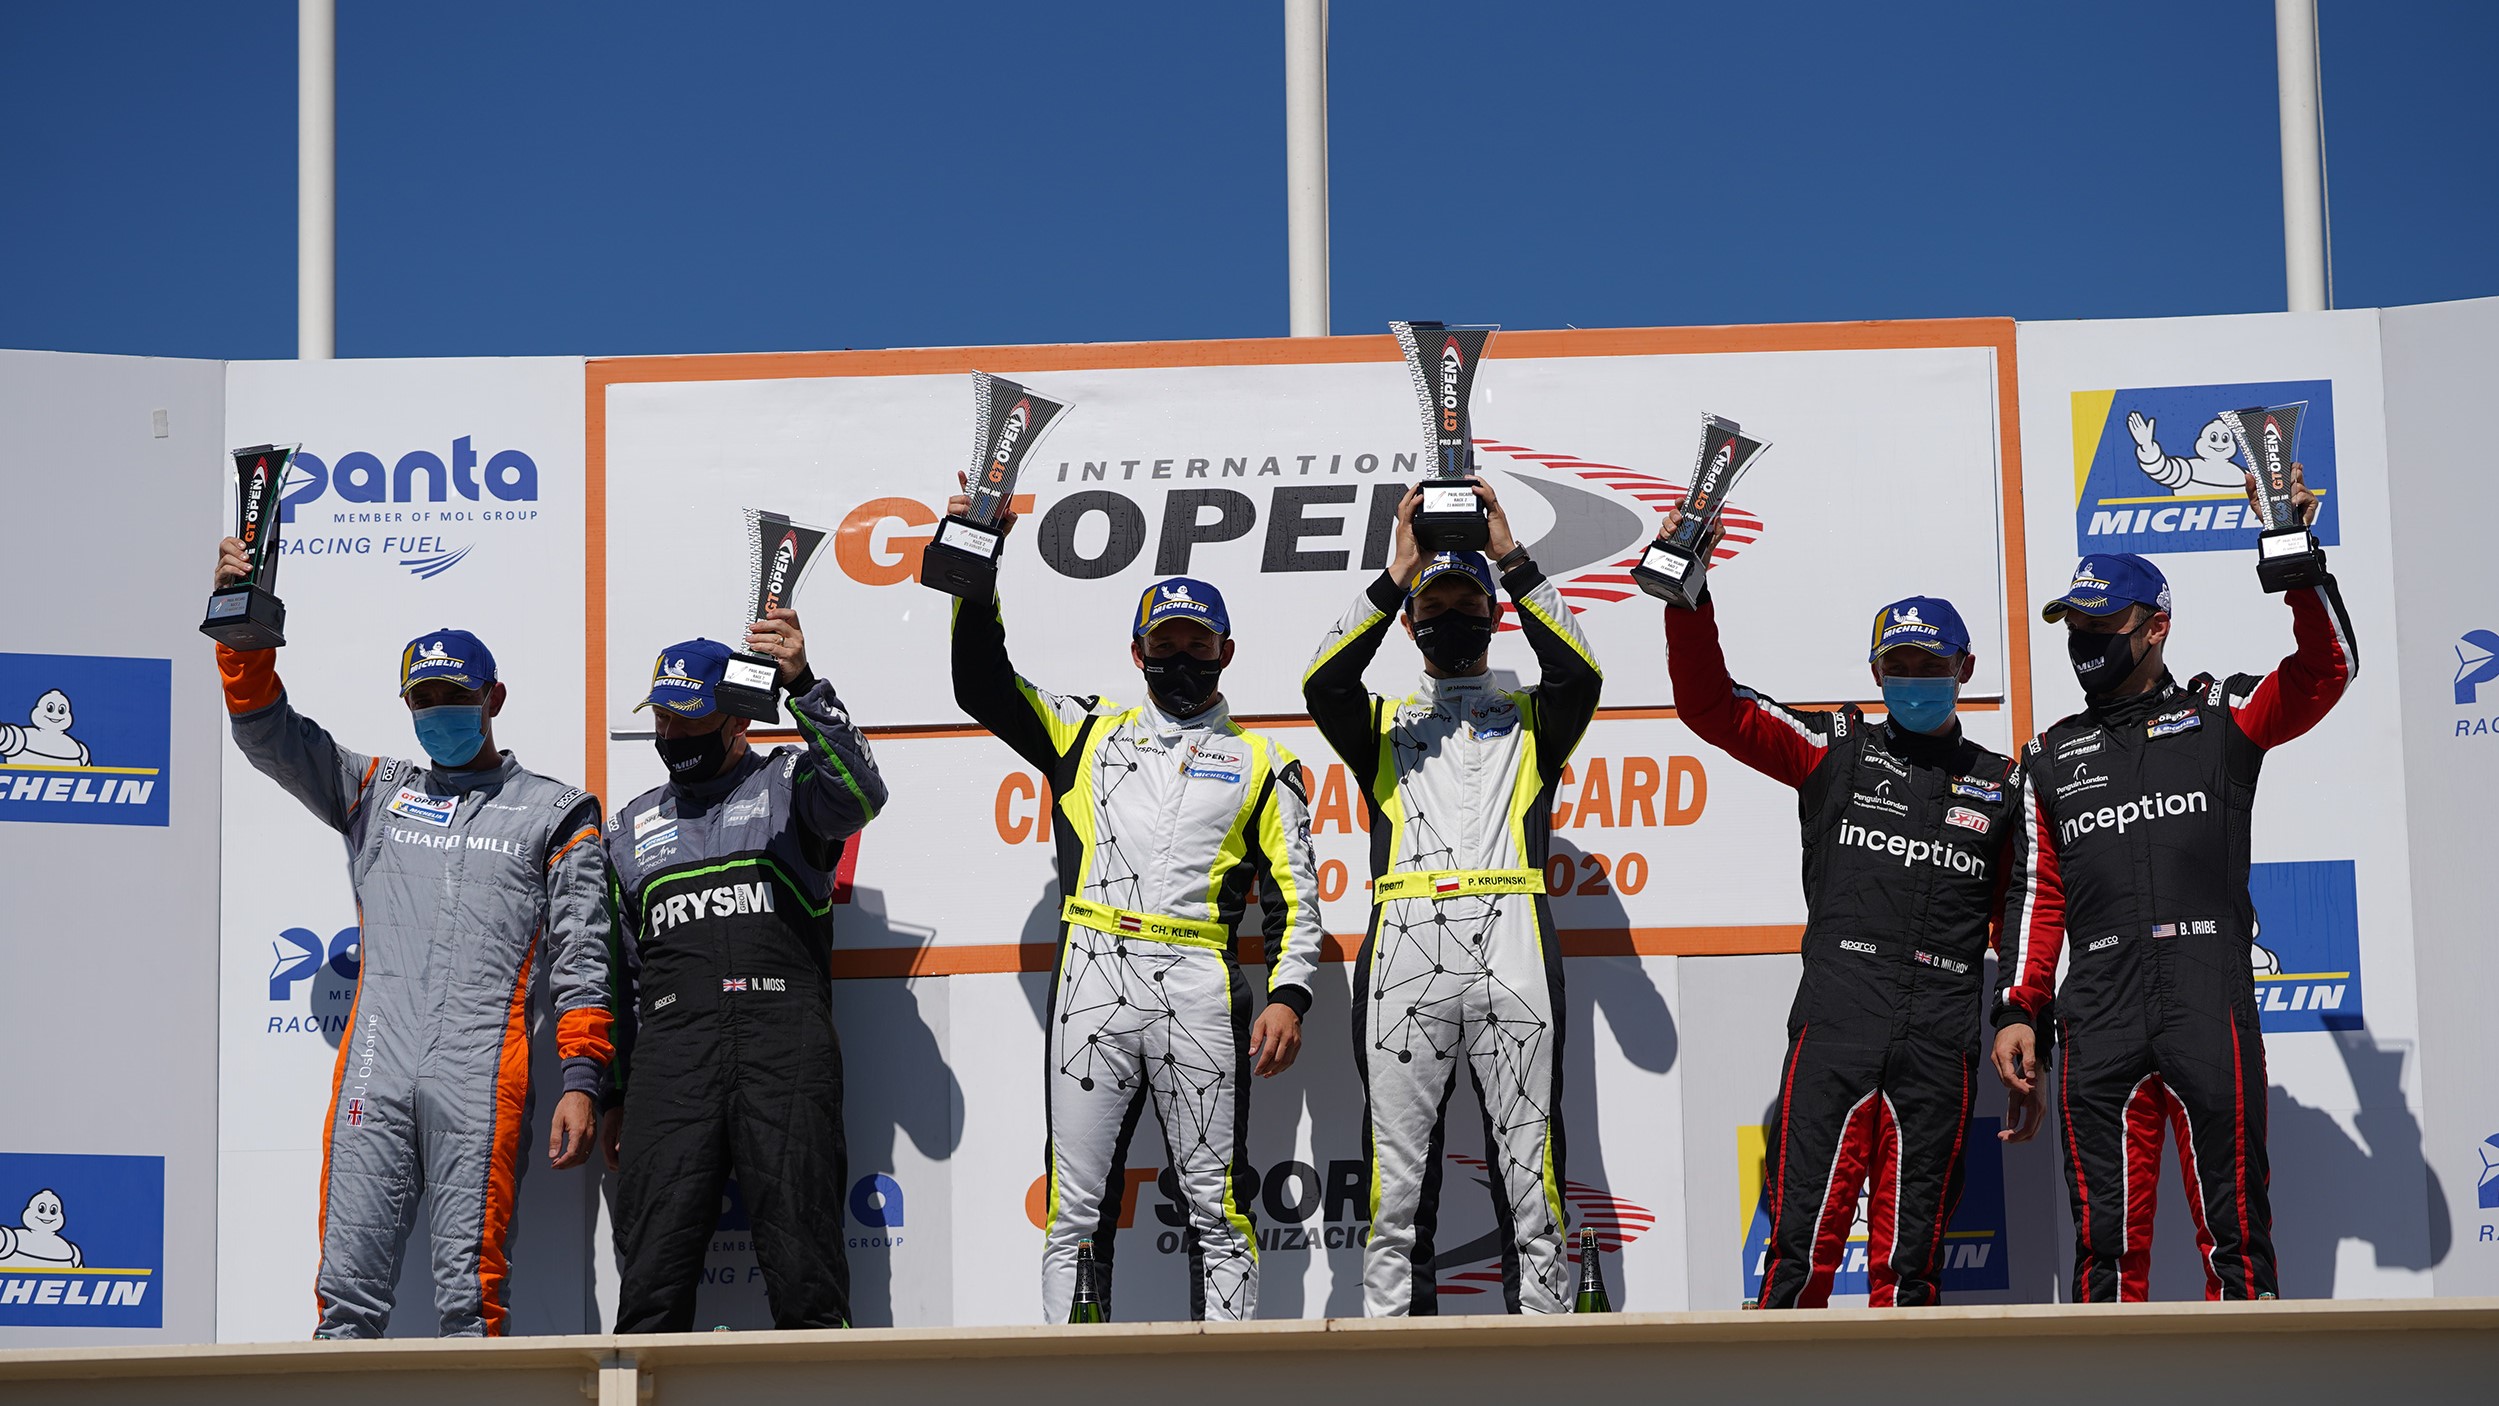 We made it at Paul Ricard! 1st place in PRO-AM Class!